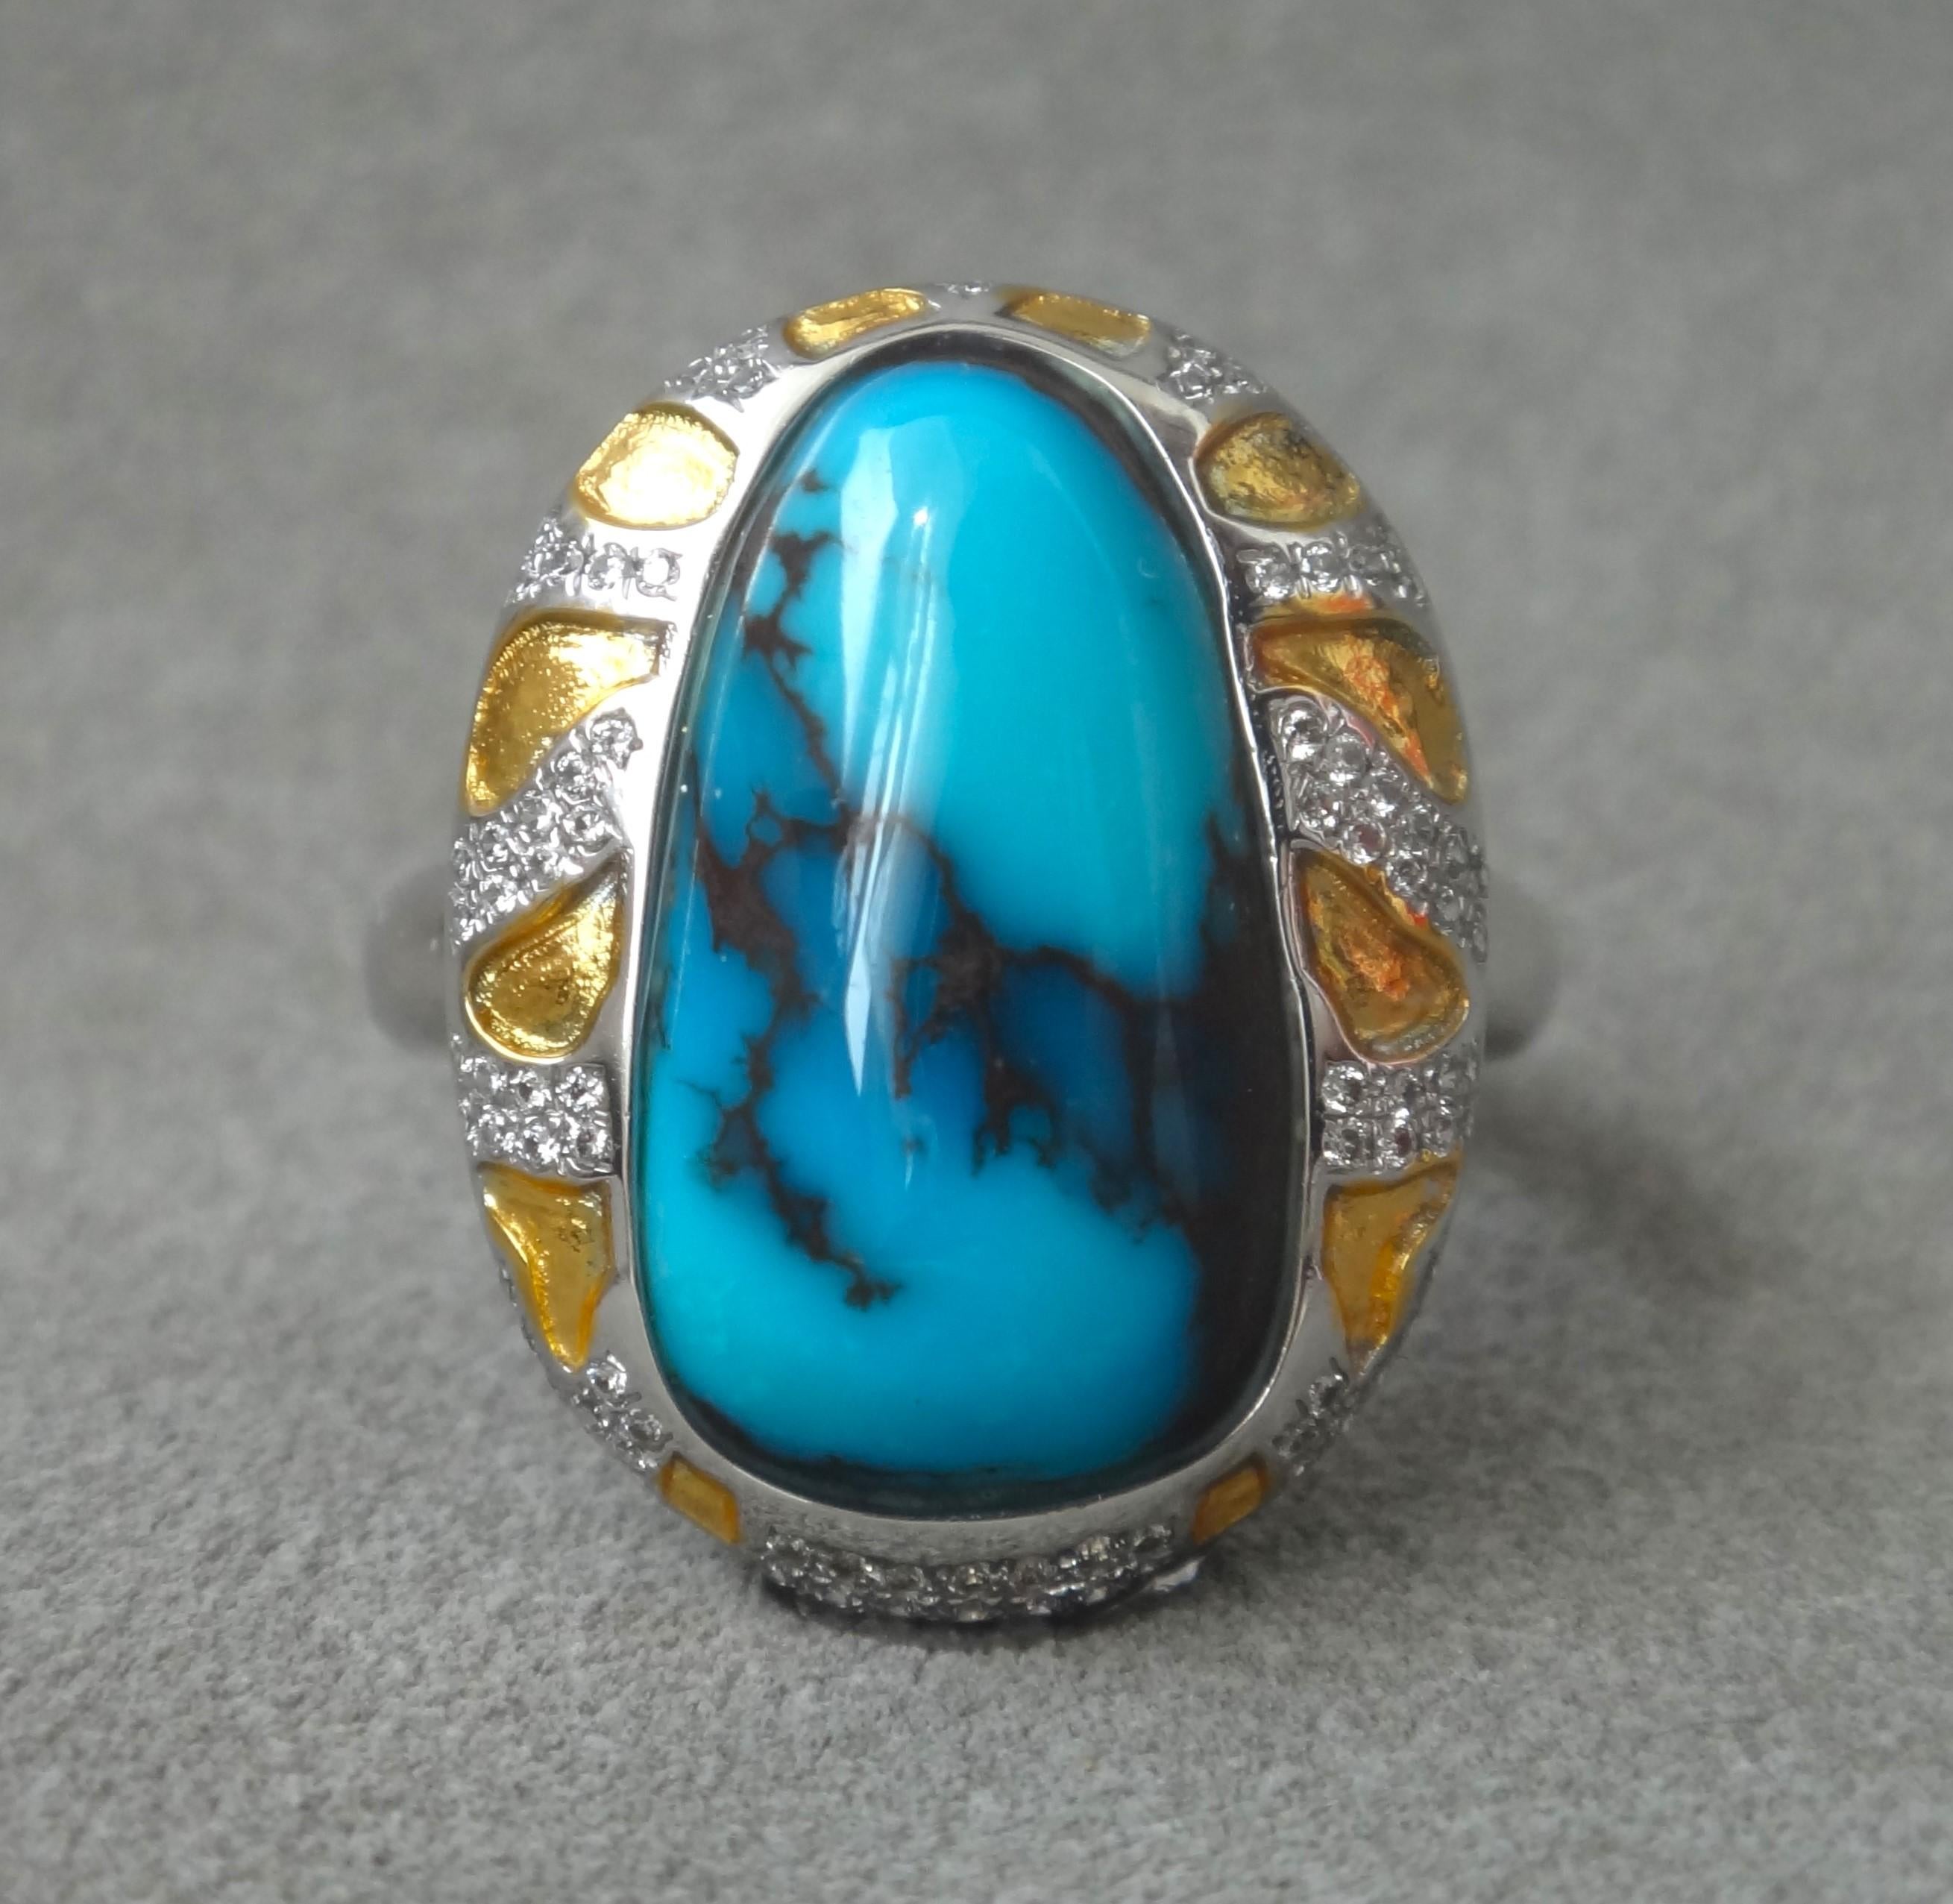 The Cocktail Ring features an exquisite and rare 12CTS oval cabochon Bisbee turquoise center stone.
In southern Arizona, the 
Lavender Pit copper mine in Bisbee is now closed. Bisbee turquoise 
varies in coloration, but most specimens are deeply